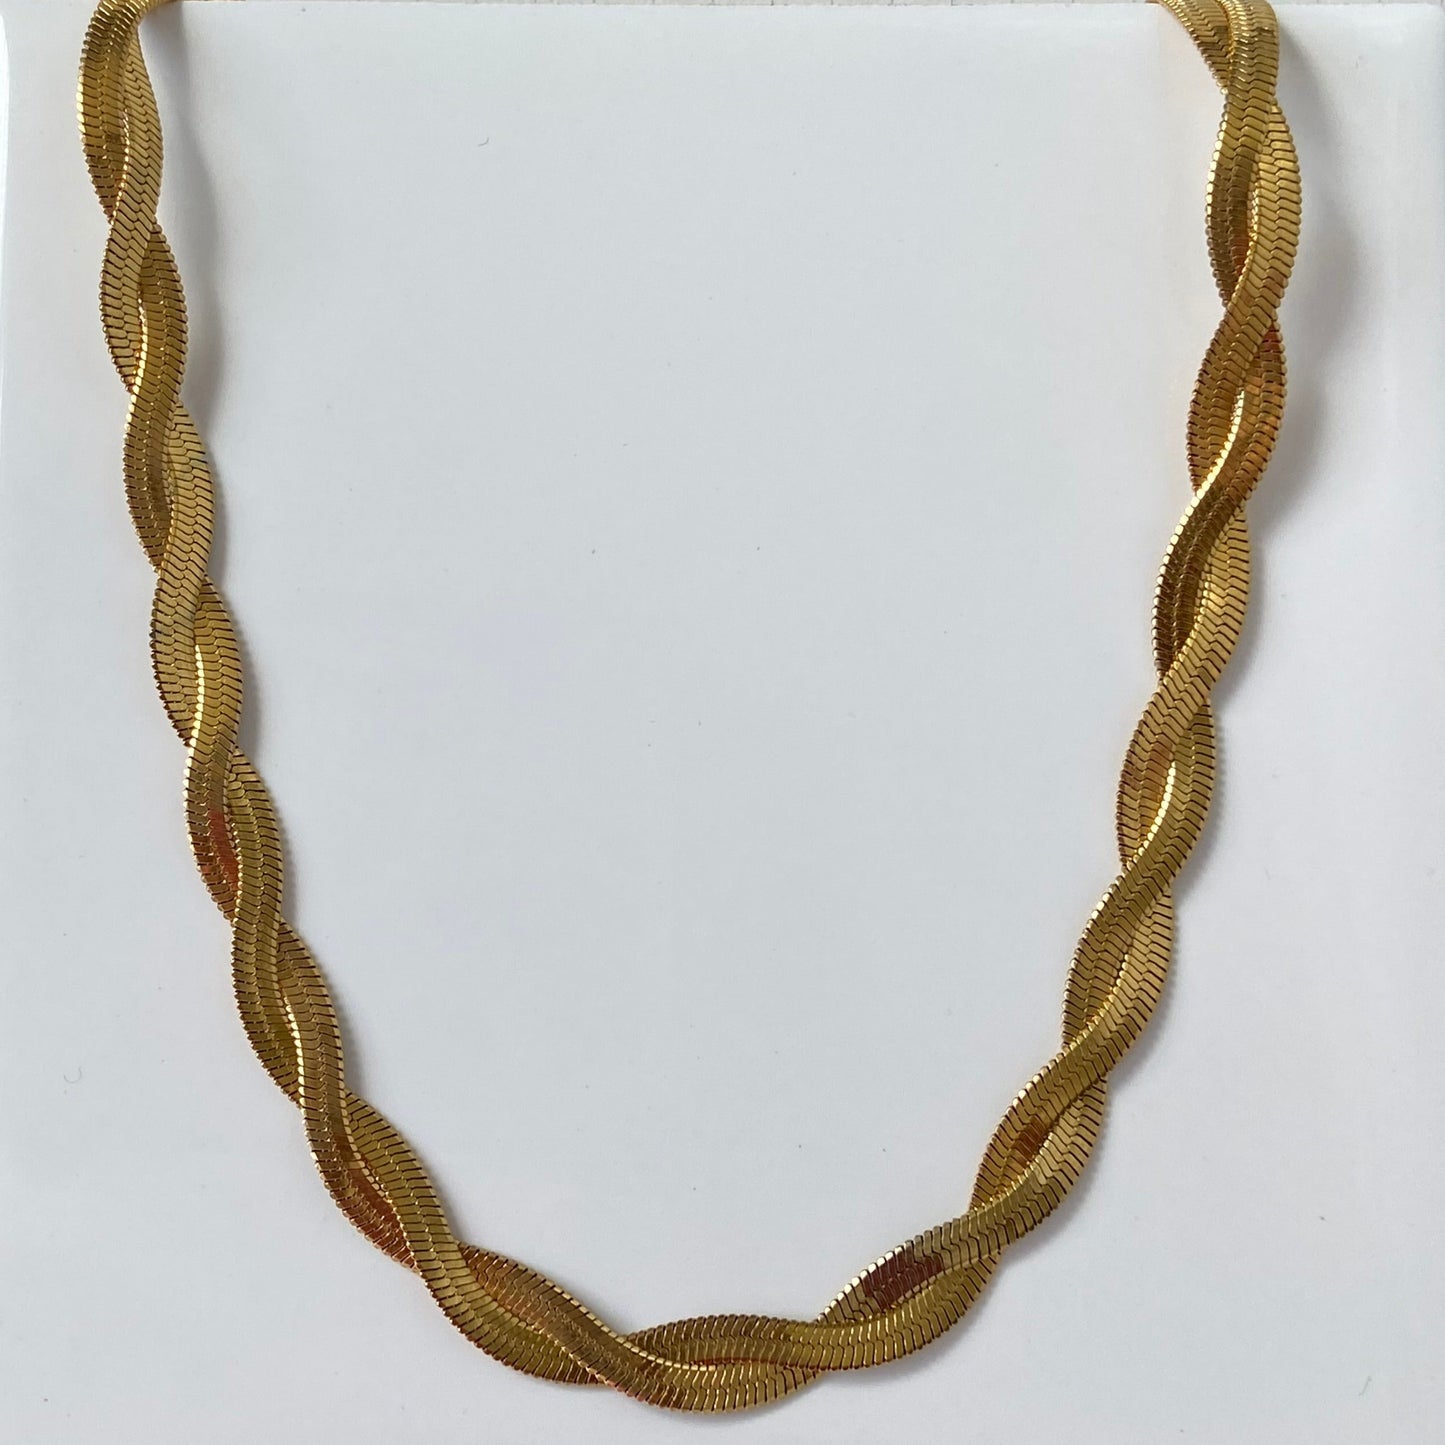 Twisted Necklace